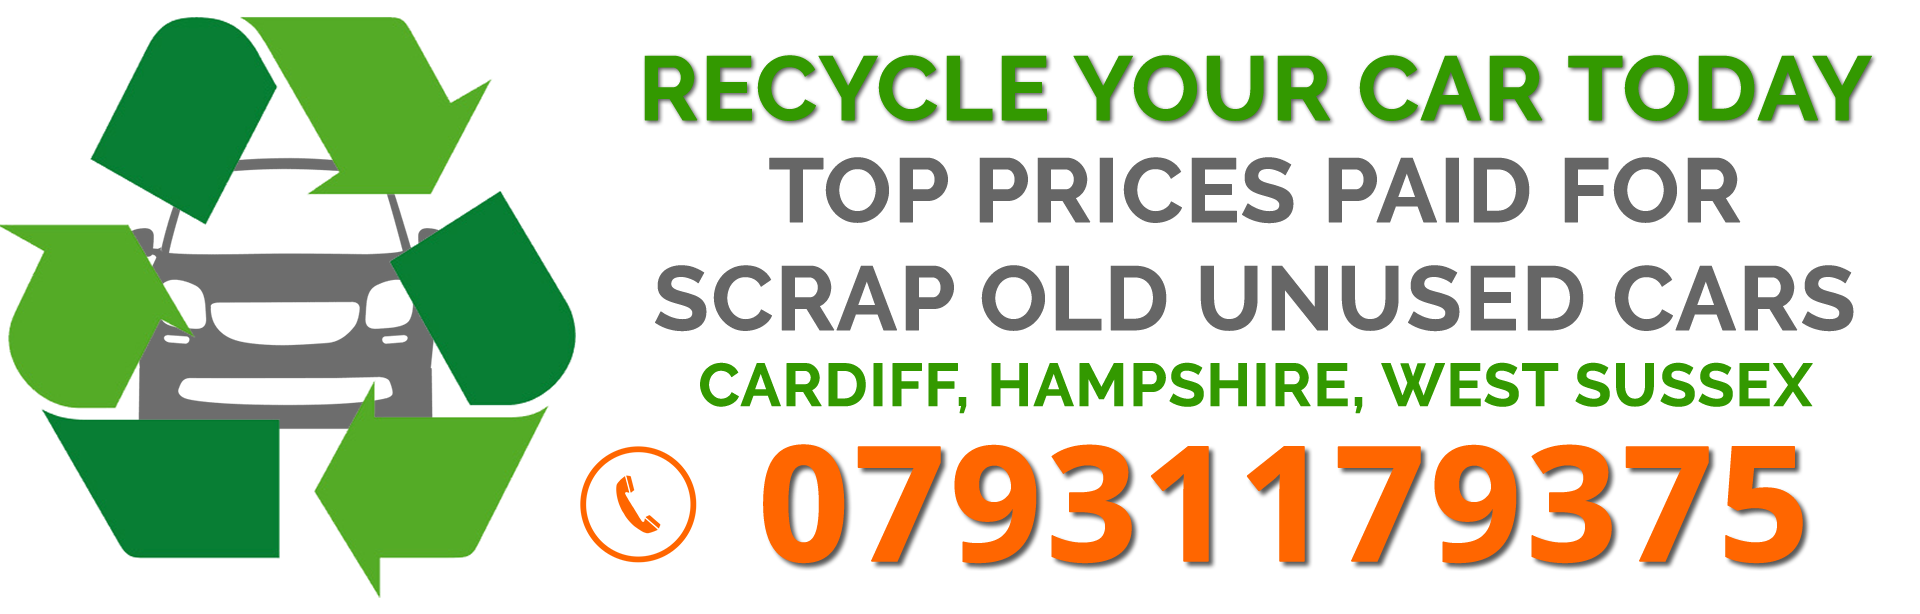 Scrap my car in Cardiff - Best Prices Paid